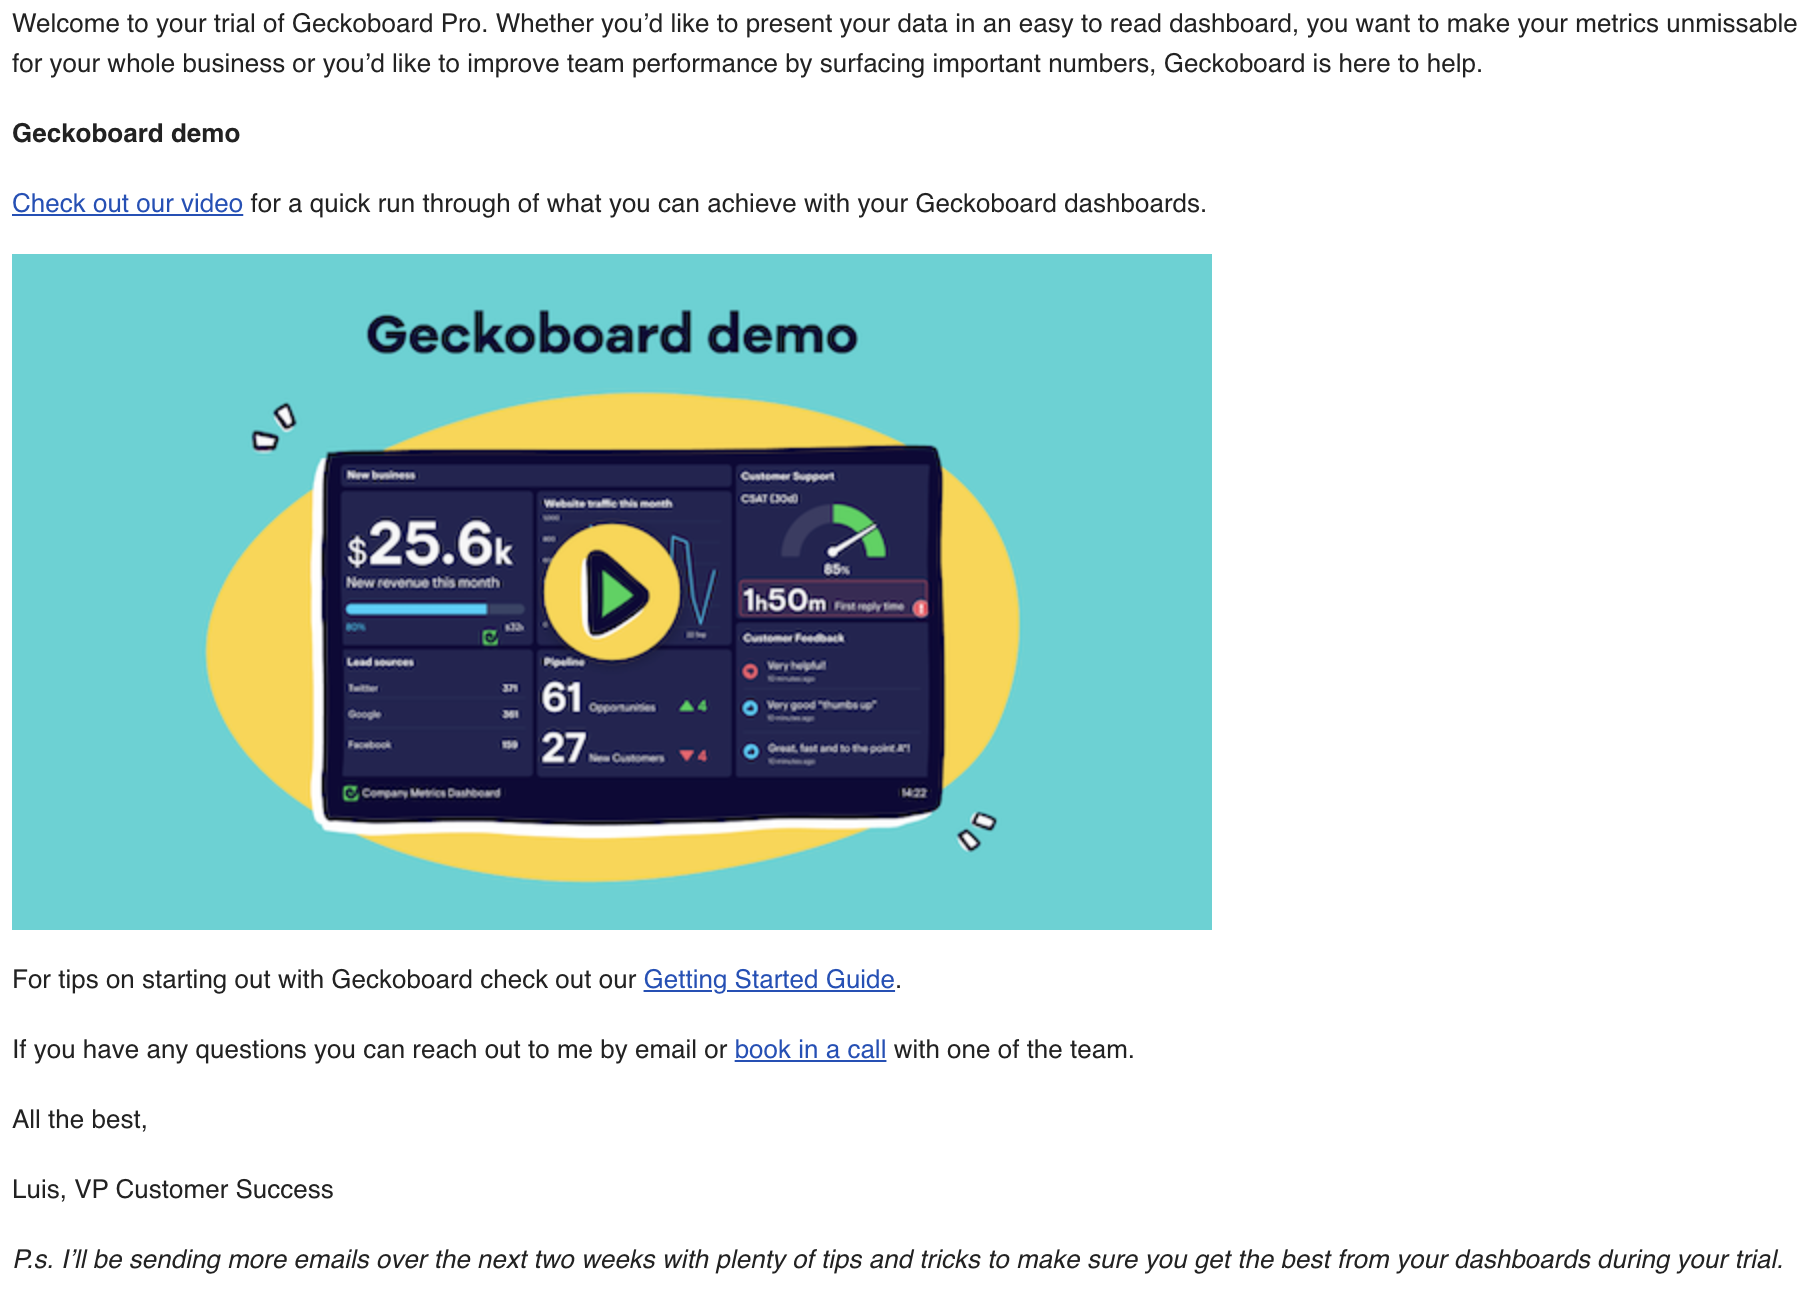 Example onboarding email from Geckoboard